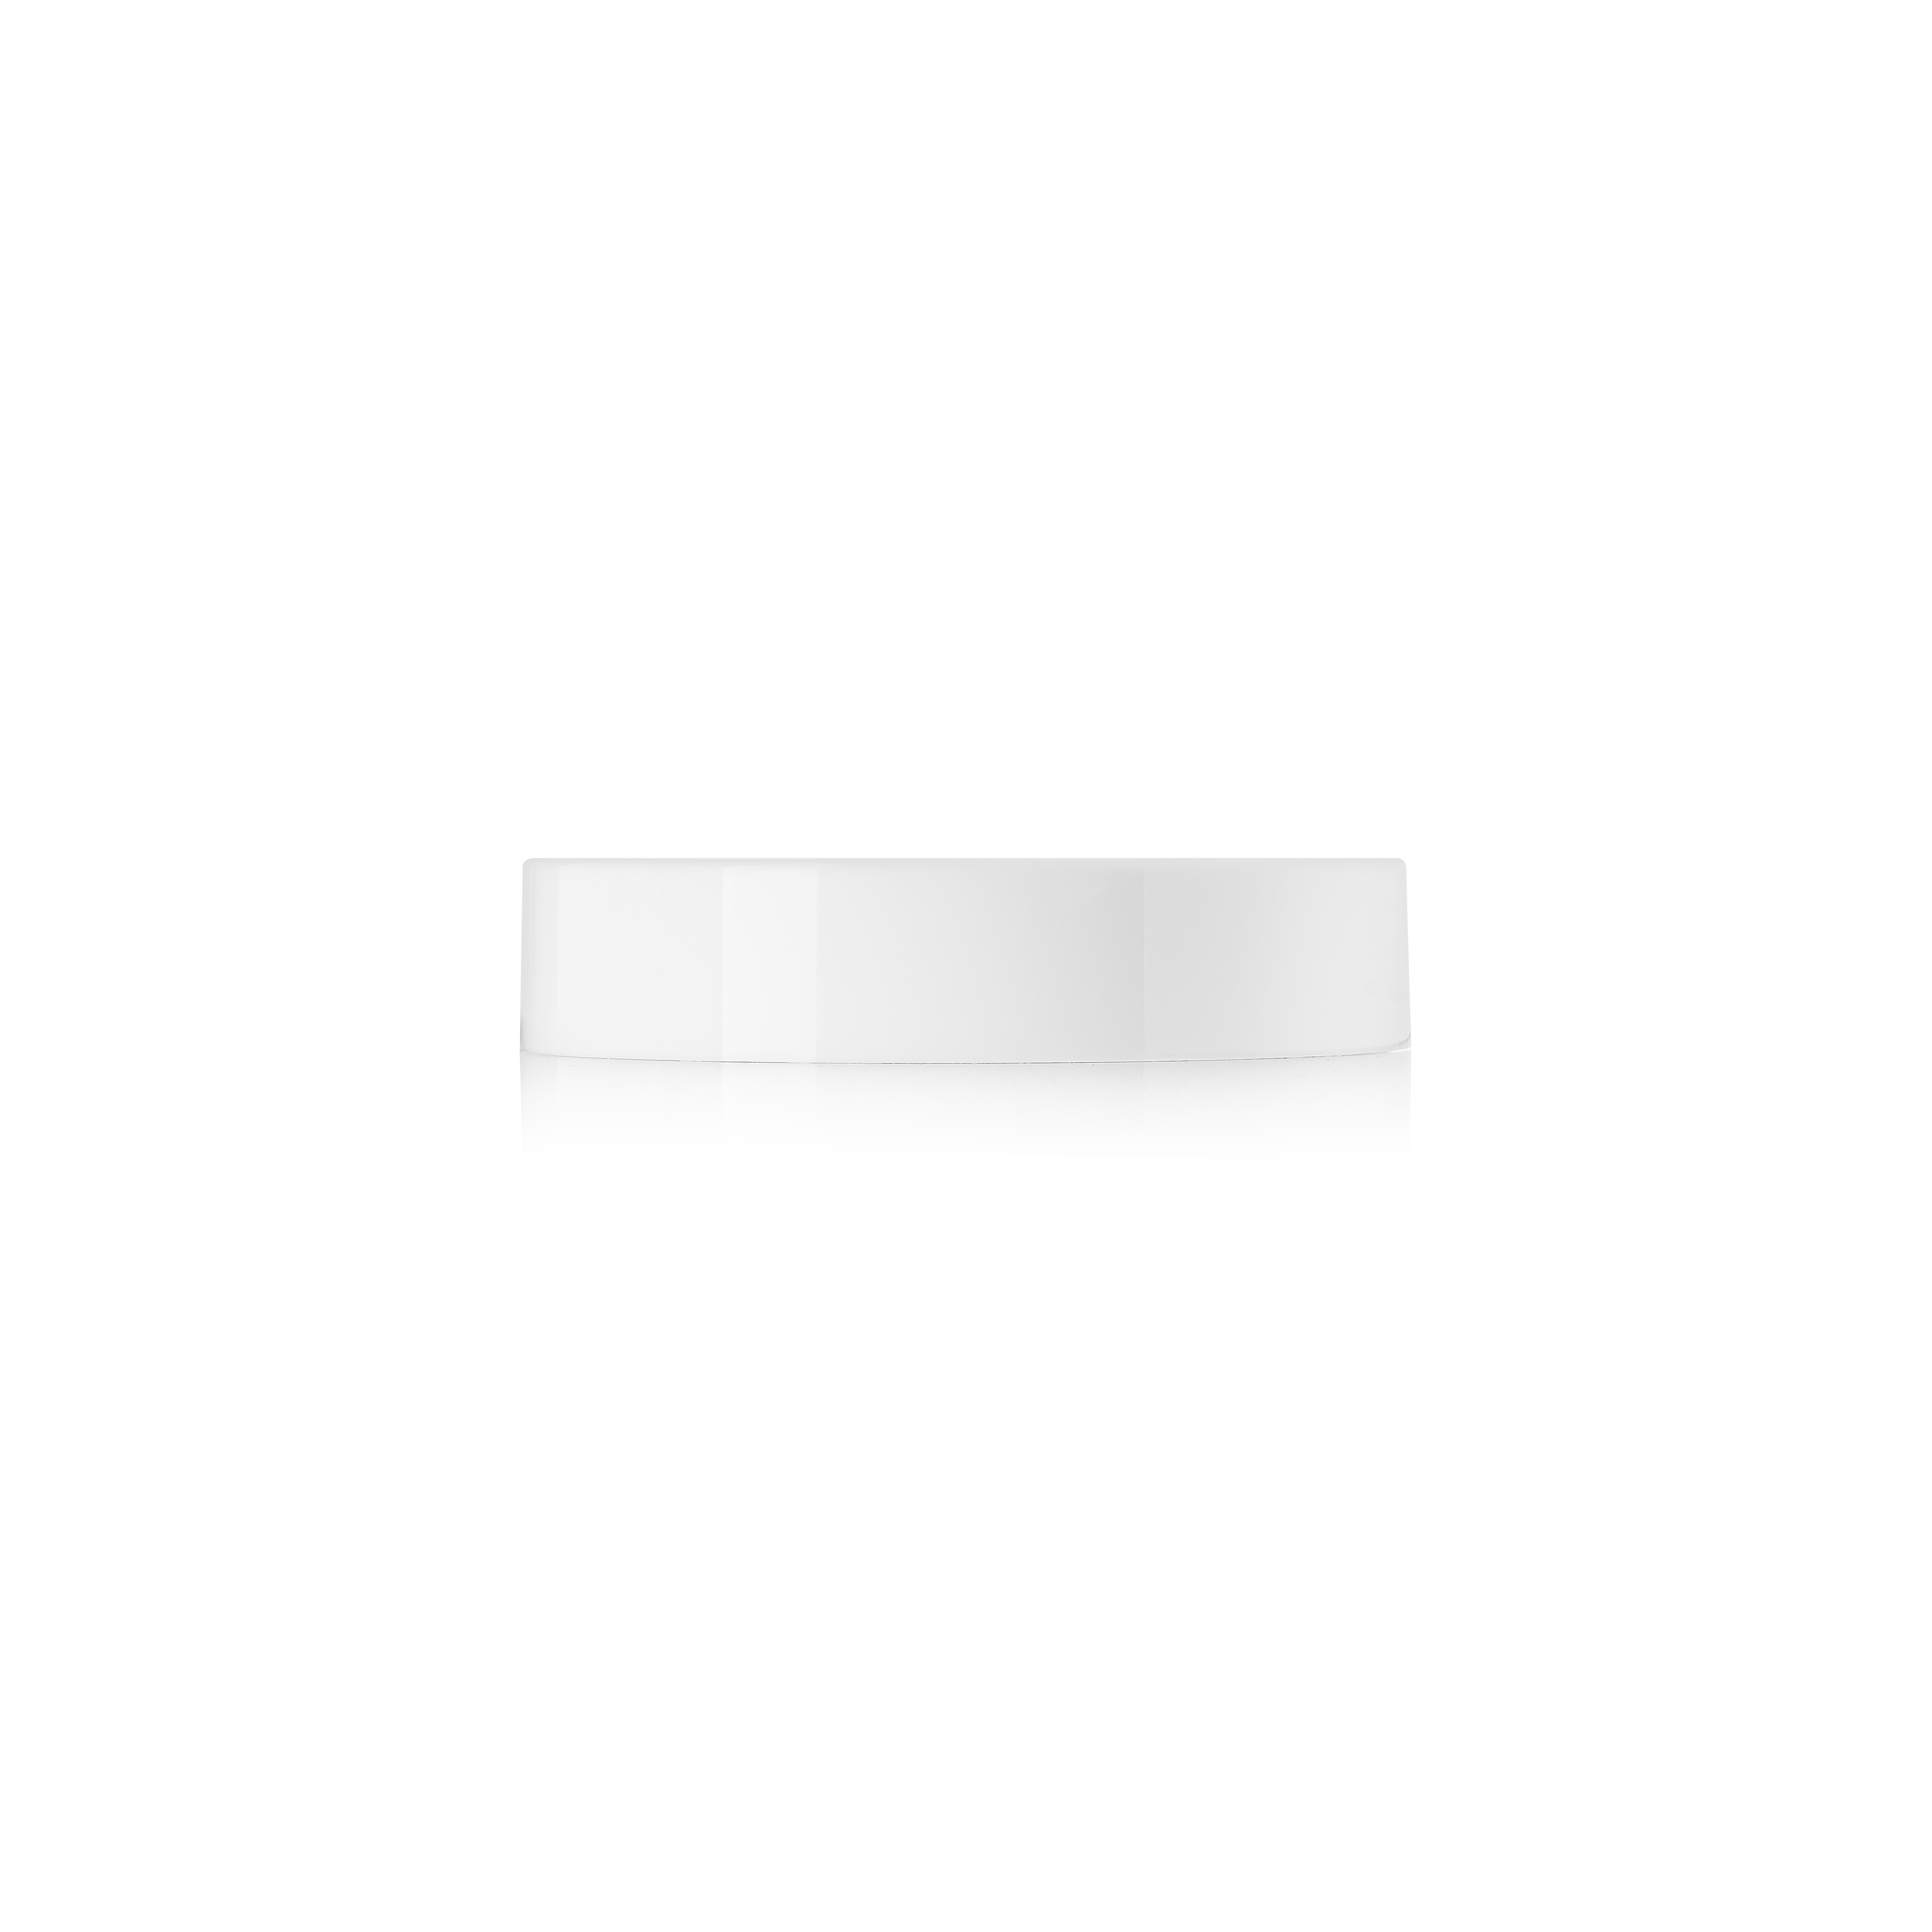 Lid double wall 82 special, PP, white, glossy finish, white inlay (Camellia 240)